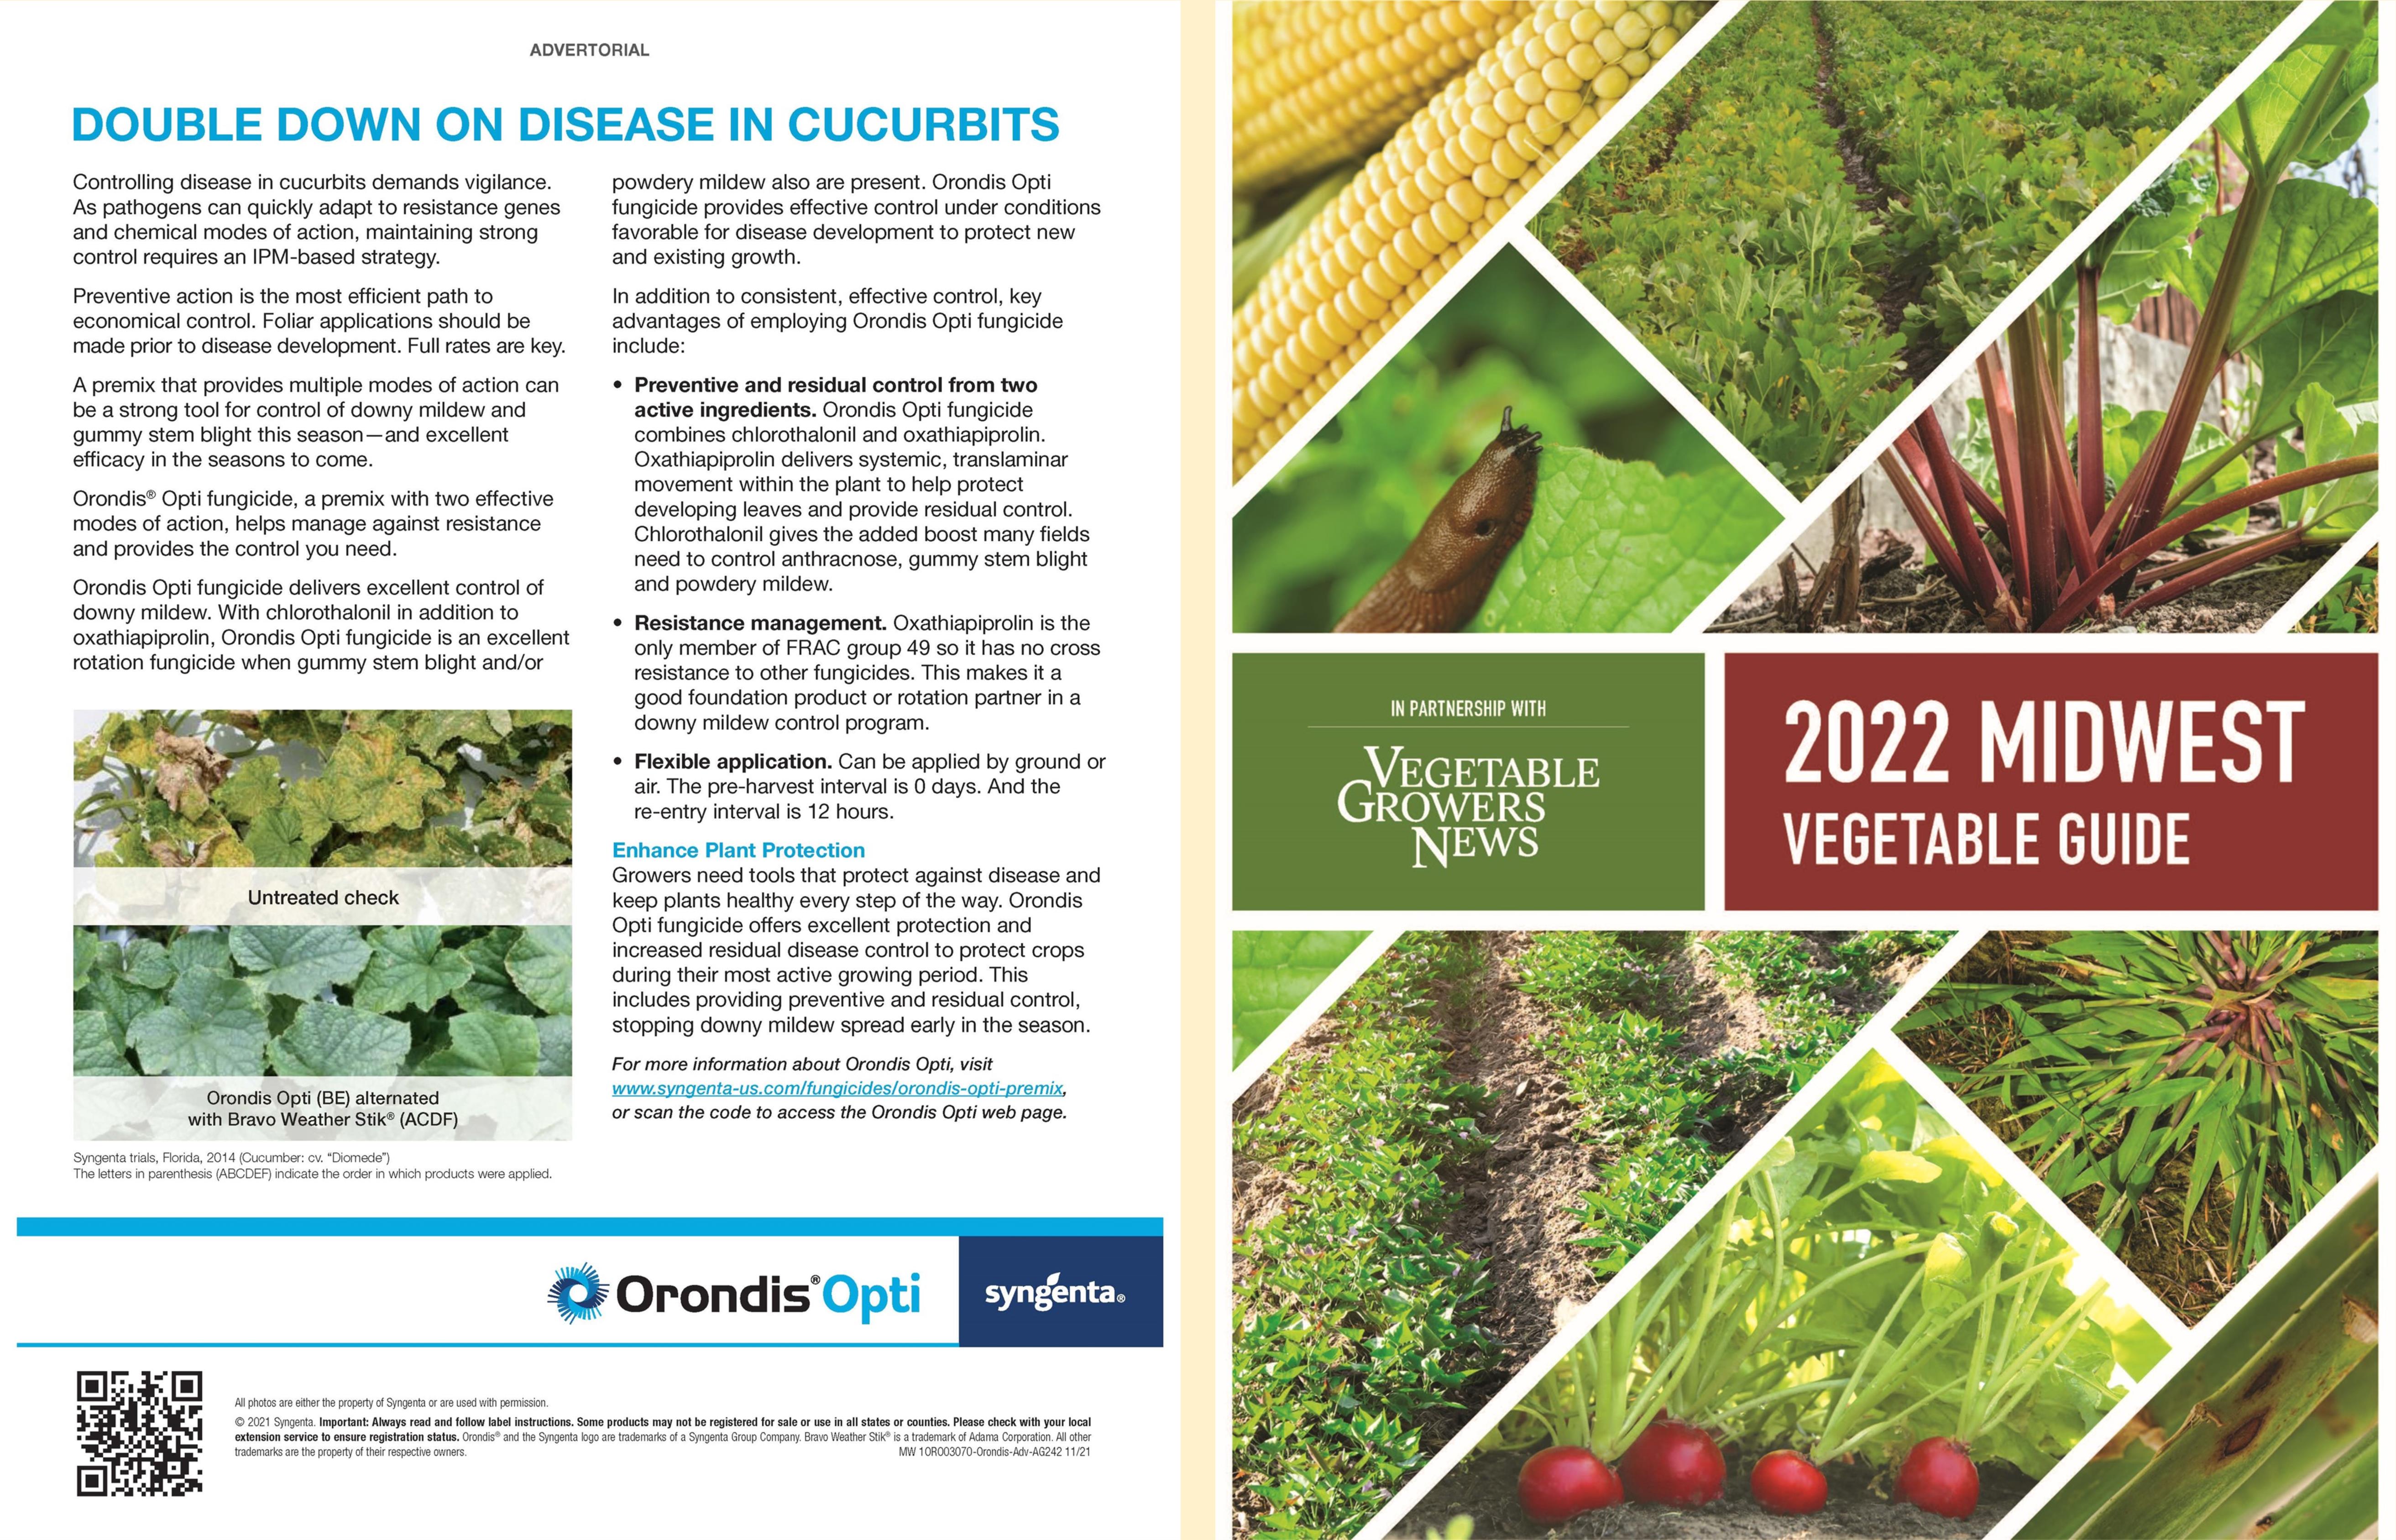 Midwest Vegetable Production Guide for Commercial Growers 2022 cover image